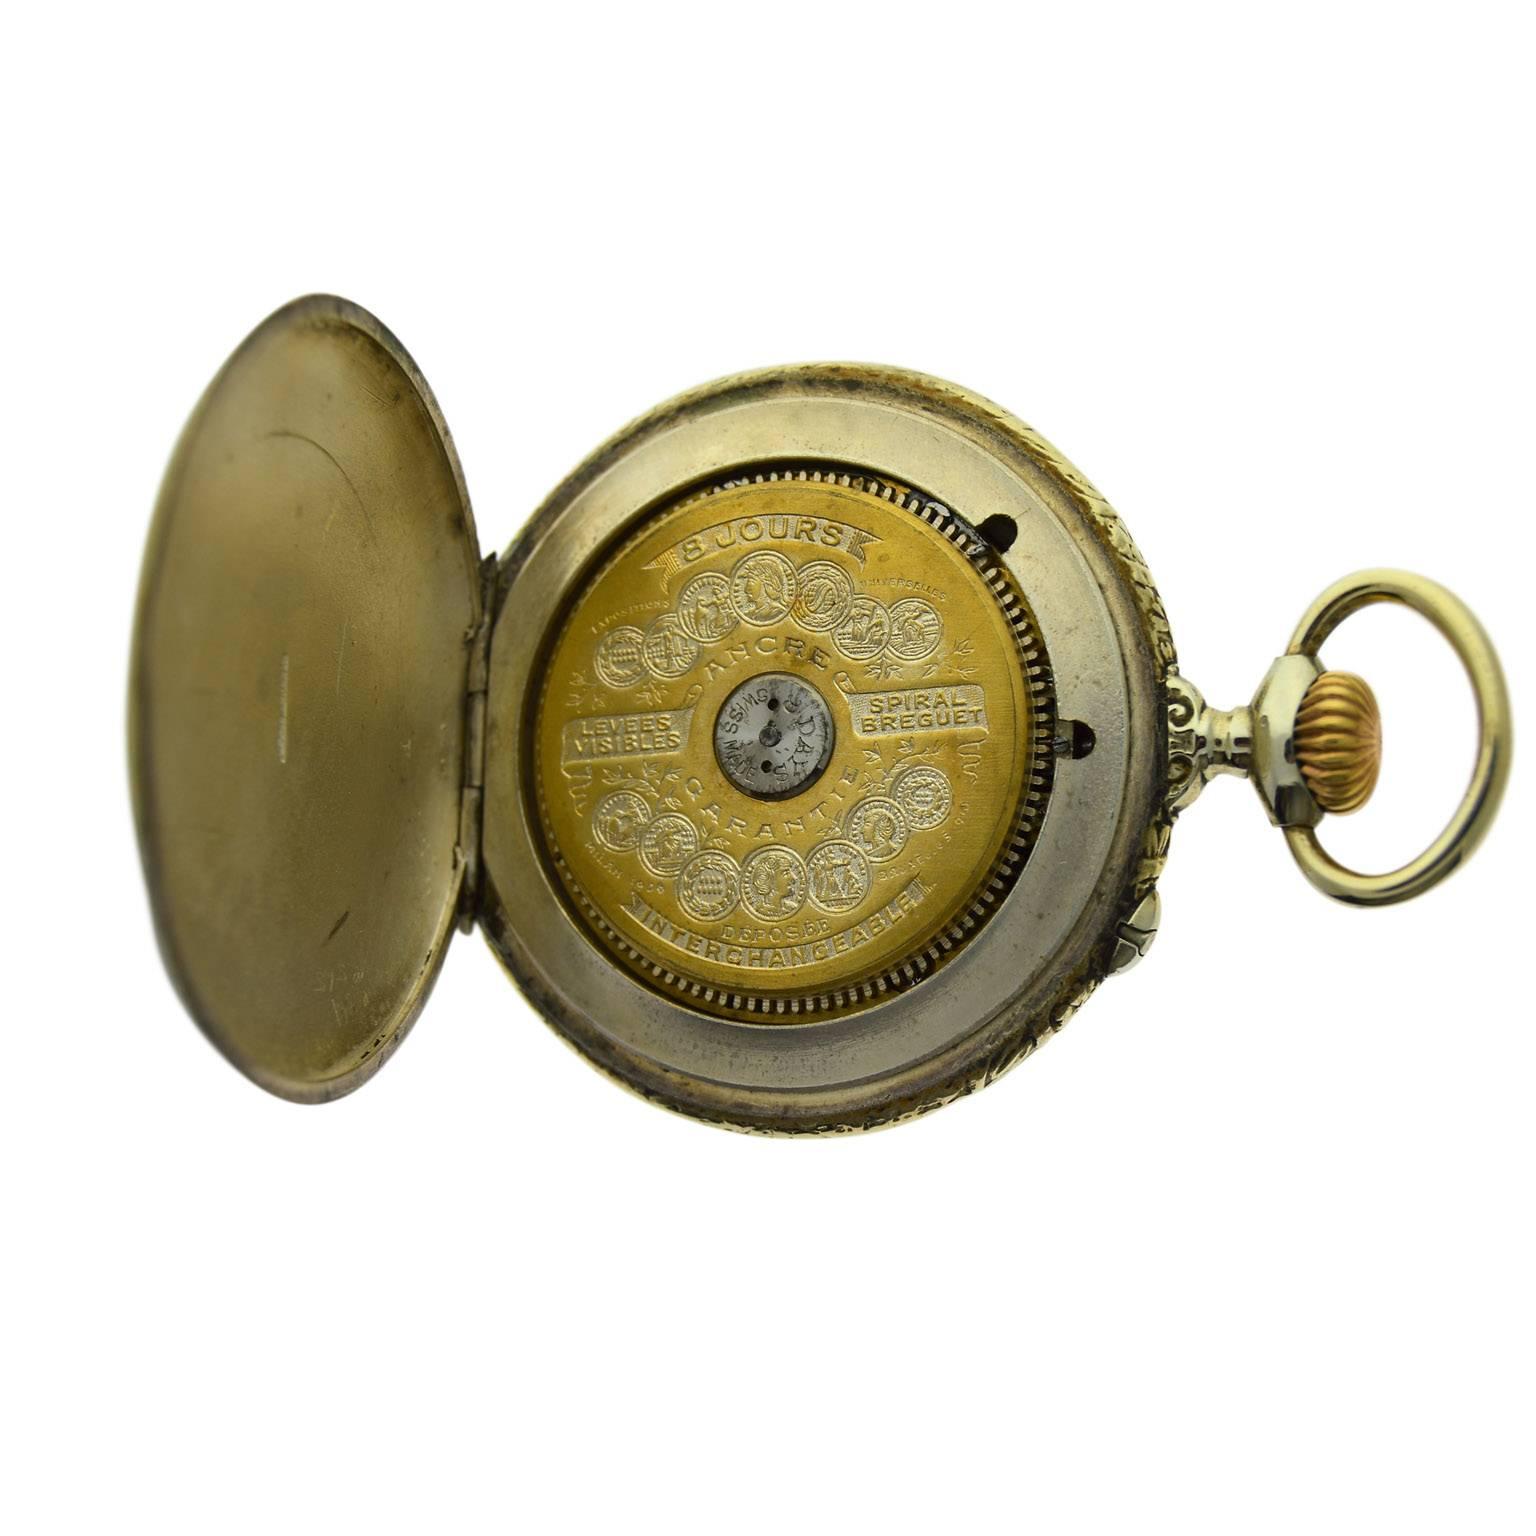 Hebdomas Nickel Silver Eight Day Pocket Watch with Exposed Balance Wheel, 1920s 1